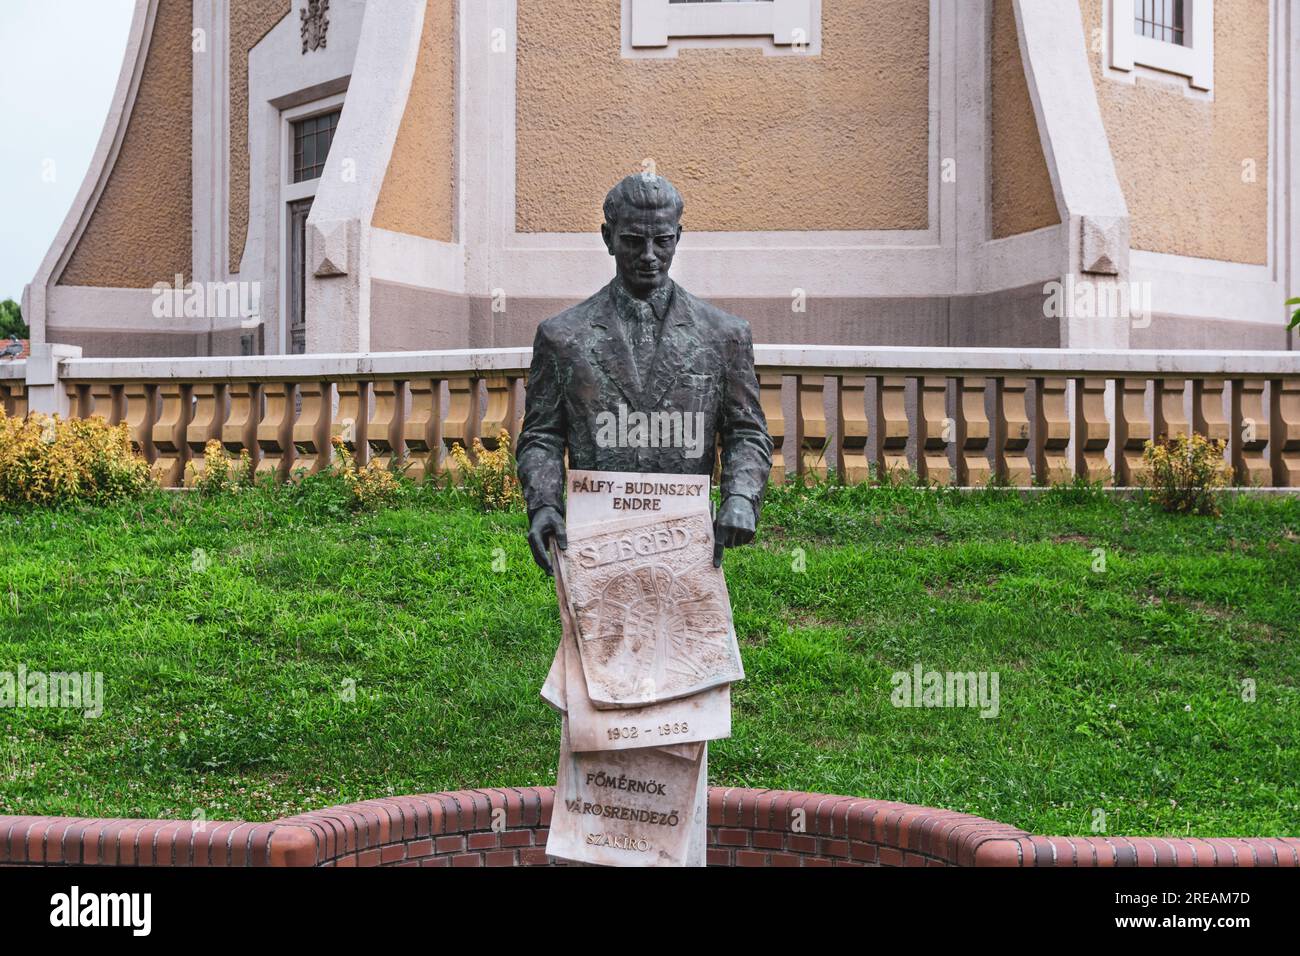 The statue of Chief City Engineer Endre Pálfy-Budinszky on Szent István Square in Szeged, Hungary Stock Photo